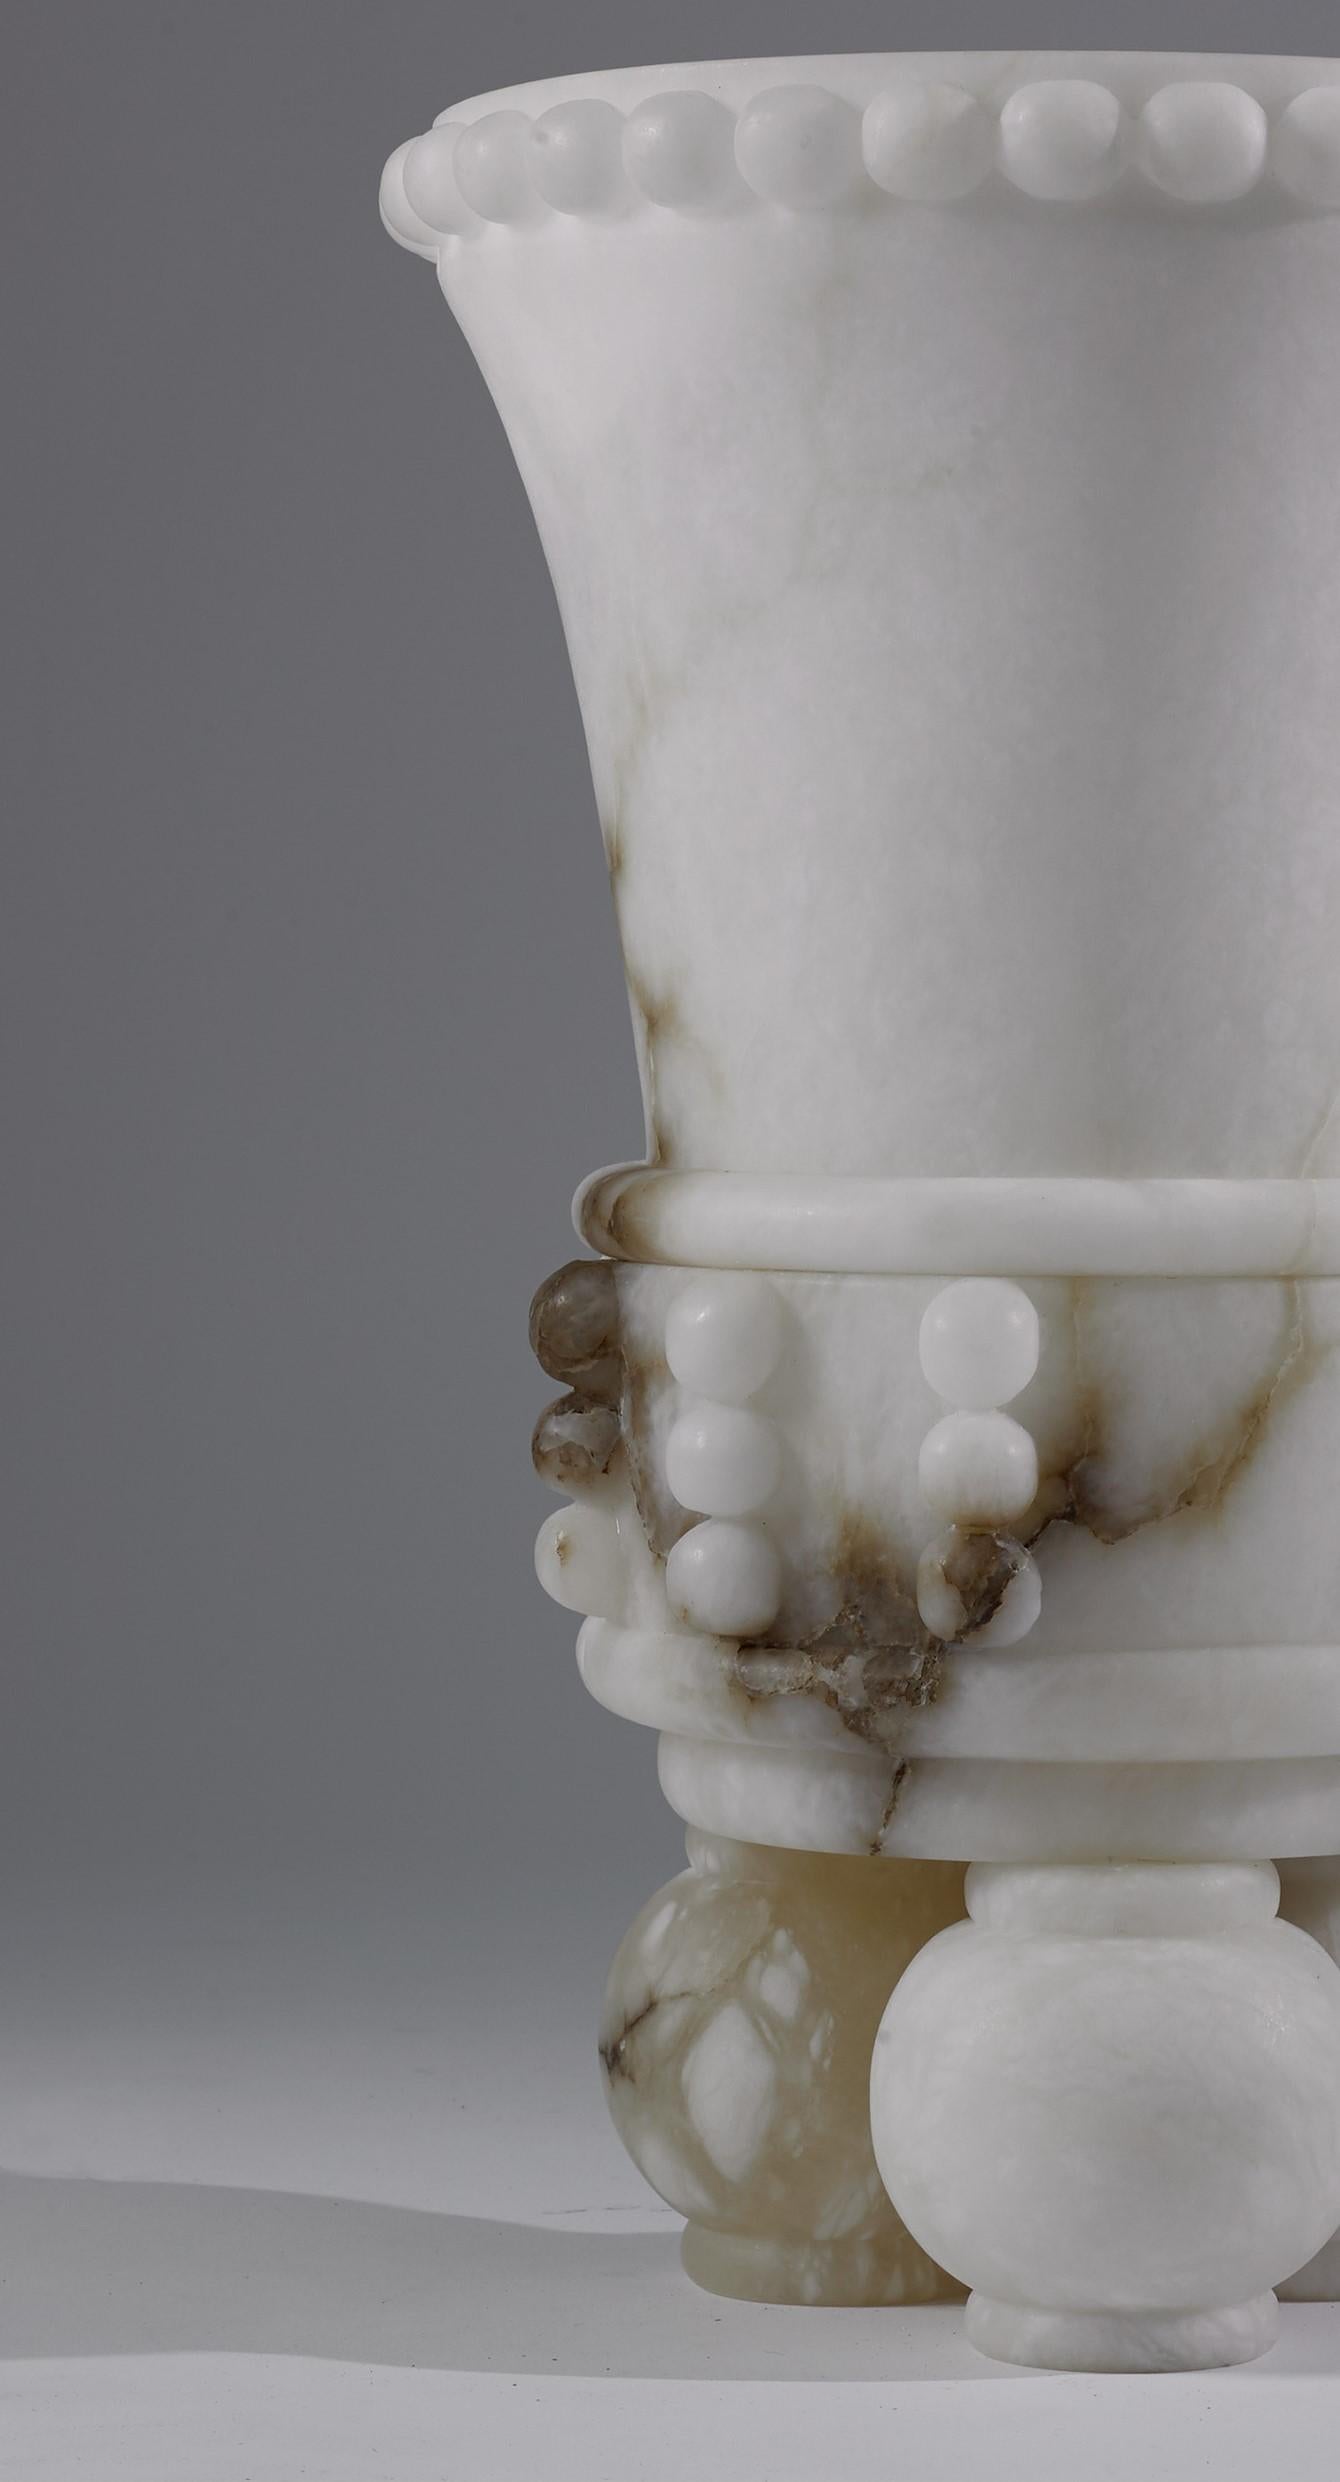 Very impressive large vessel sculpted from the purest alabaster found in Italy, inspired by the Mayan clay vessels used in ceremonies by this ancient civilization. A unique piece that stands as a very aloof time sculpture.

Made exclusively for